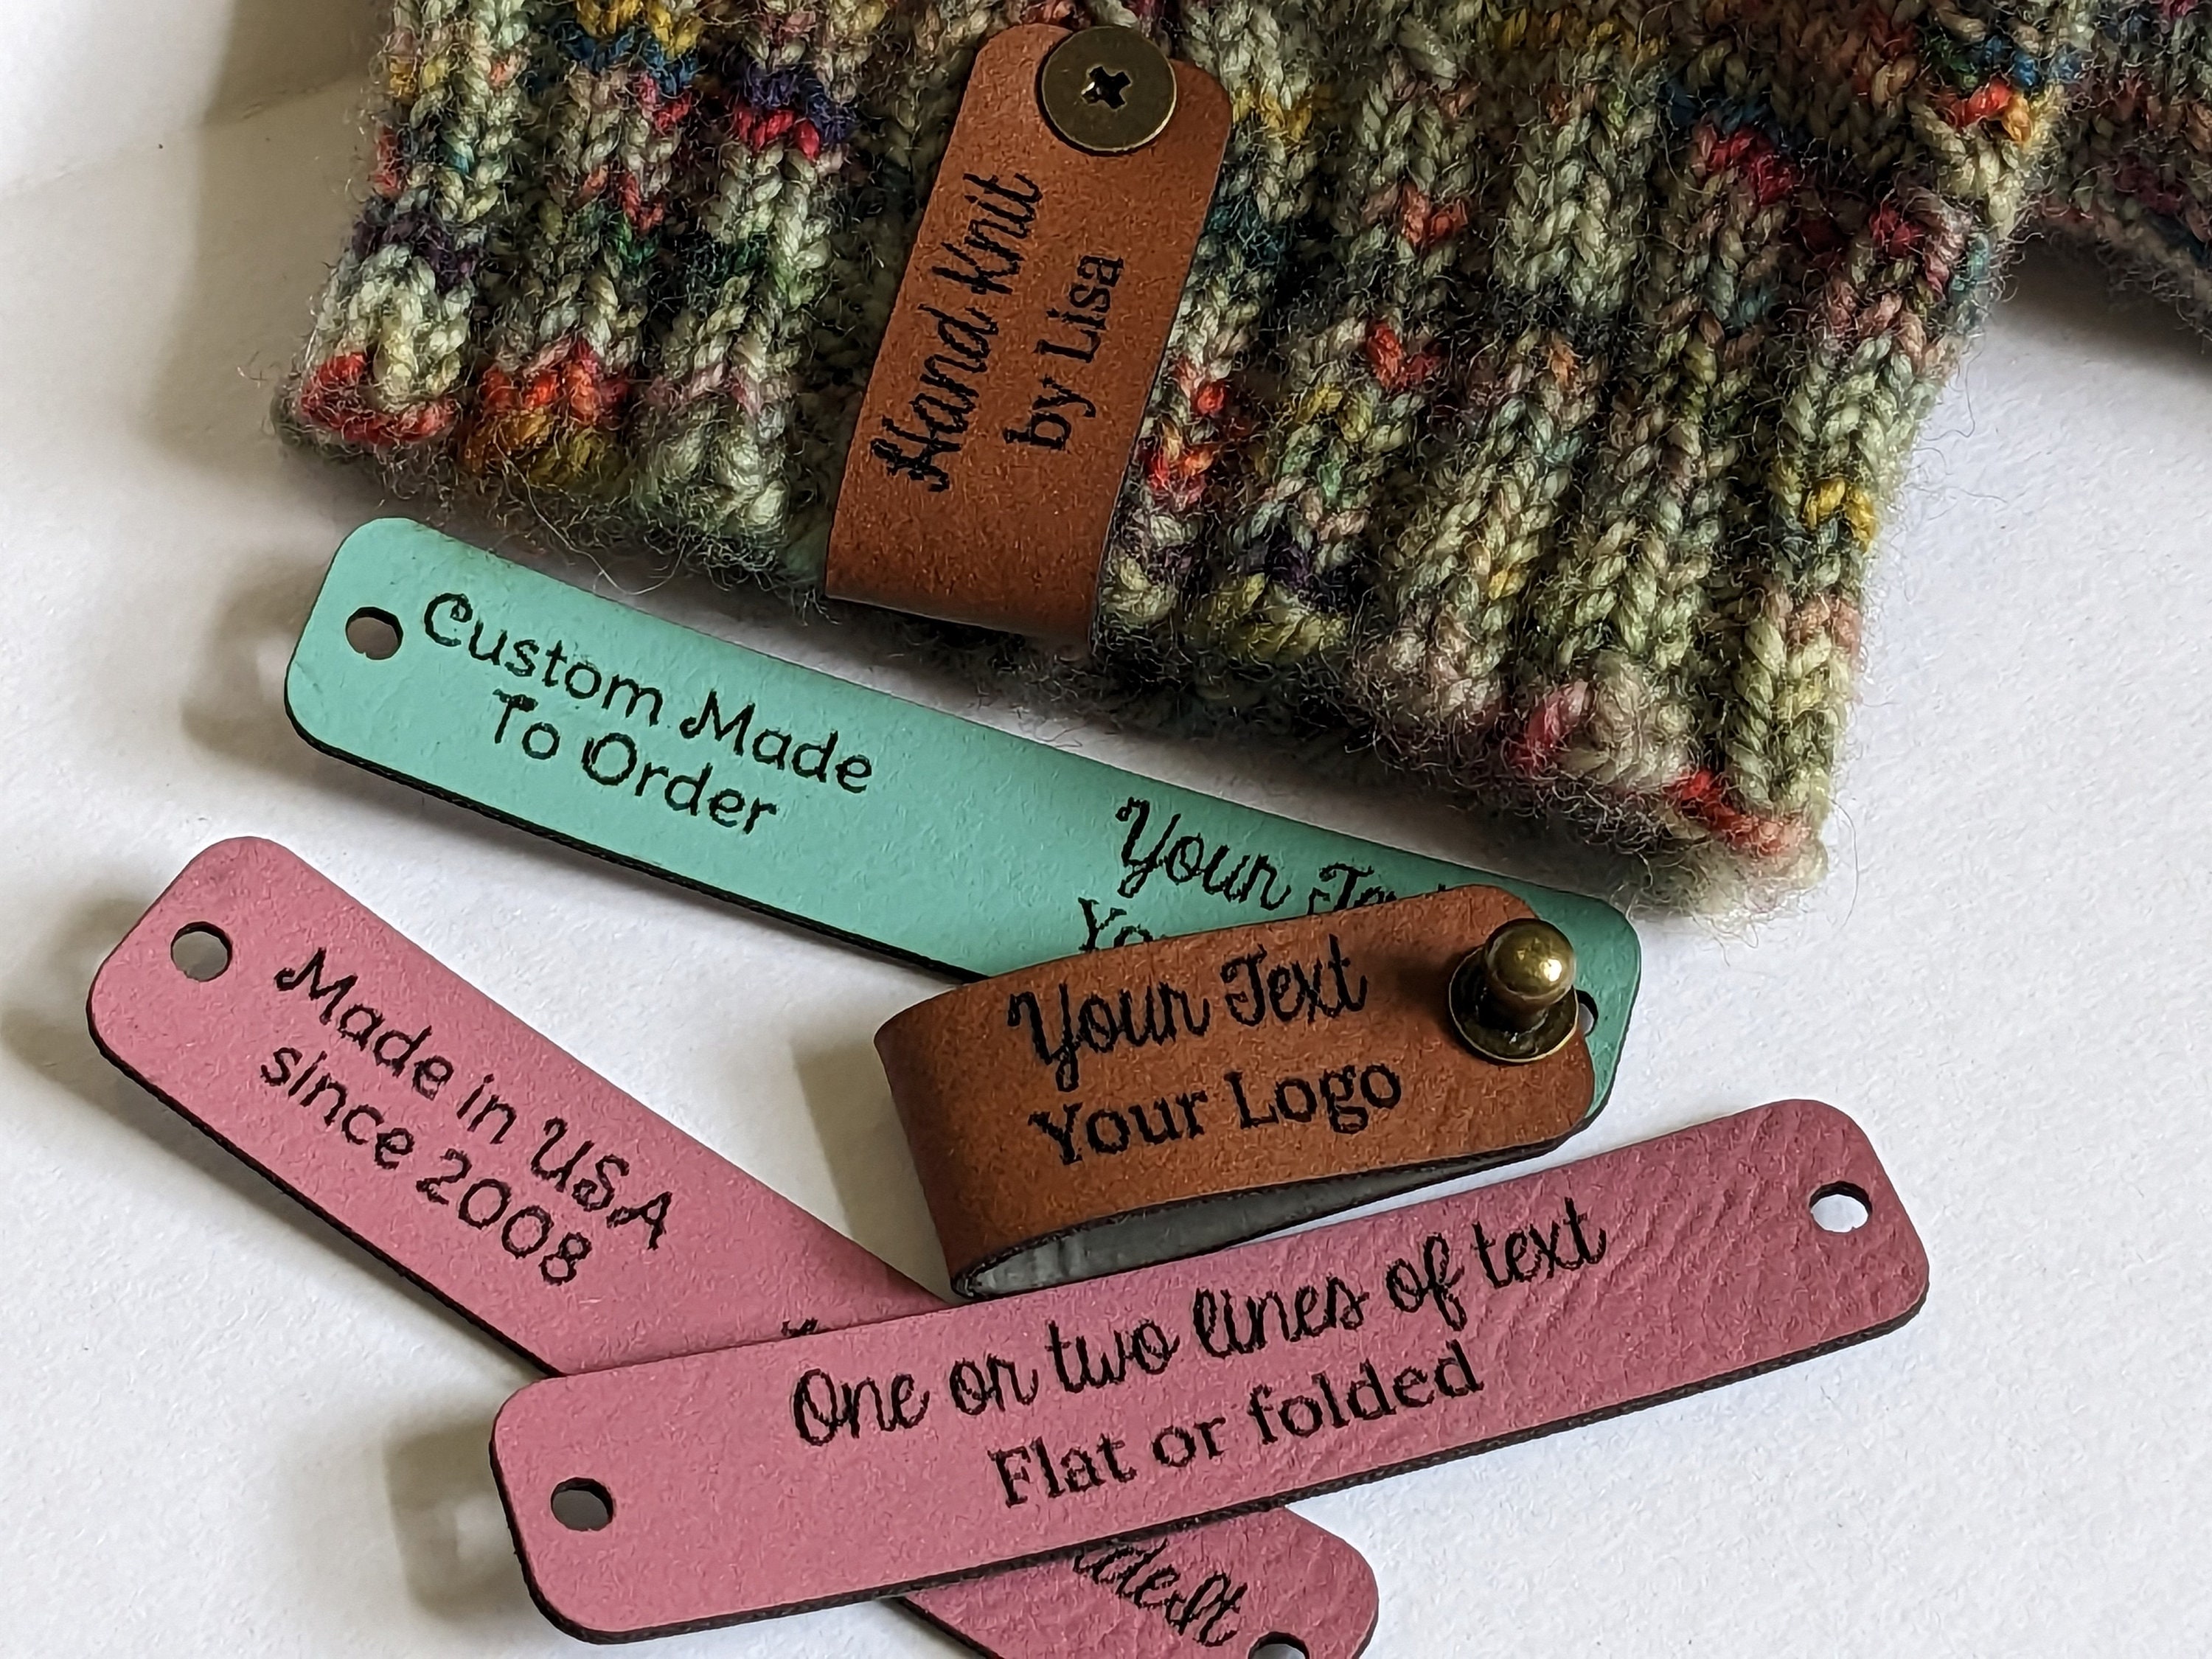 Leather labels for handmade items, custom clothing labels - Brute Handcraft